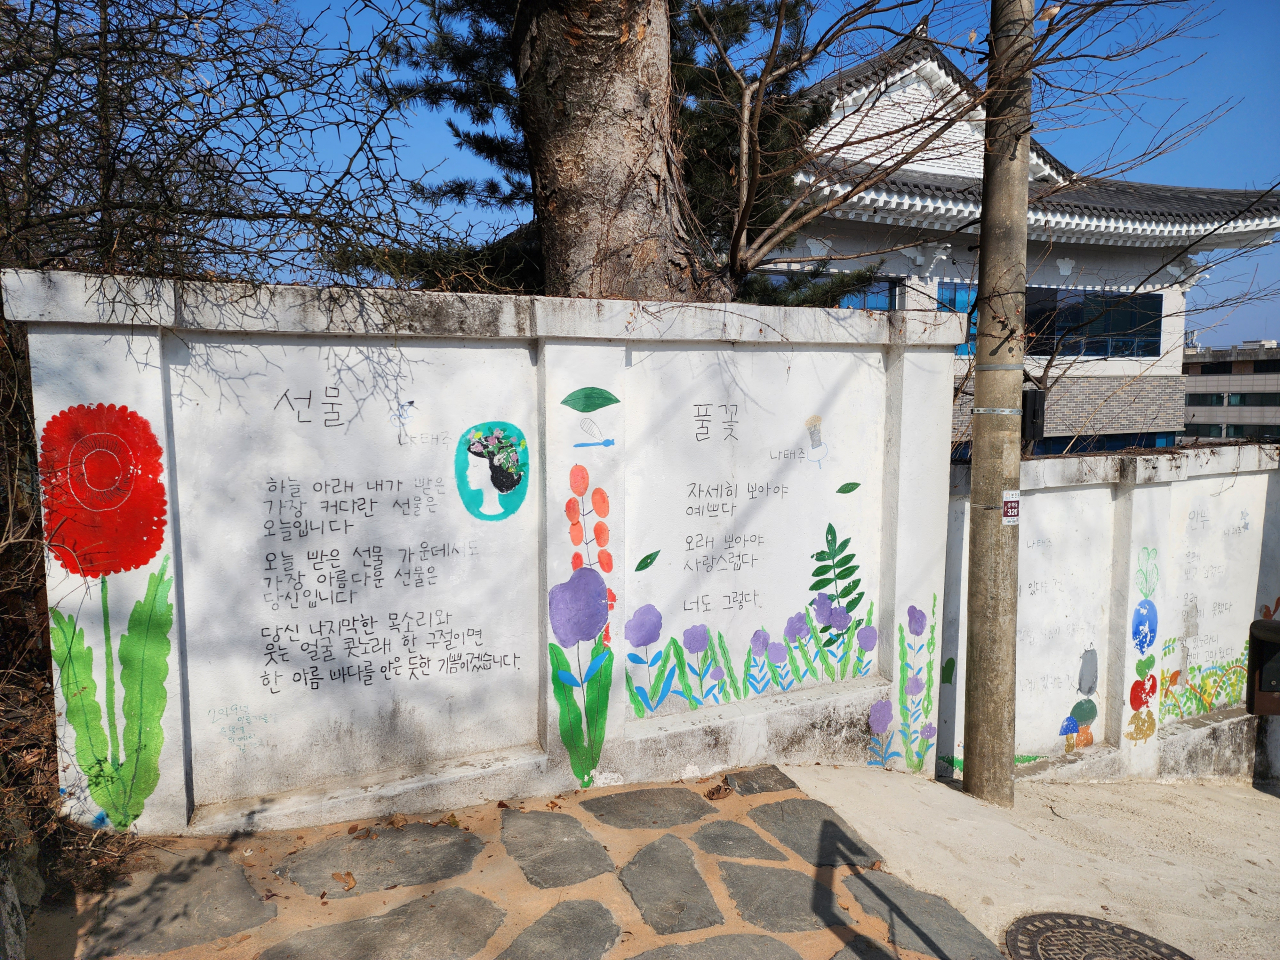 Poems by Na Tae-joo are on display around Gongju Pulkkot Literary House in Gongju, South Chungcheong Province. (Hwang Dong-hee/The Korea Herald)